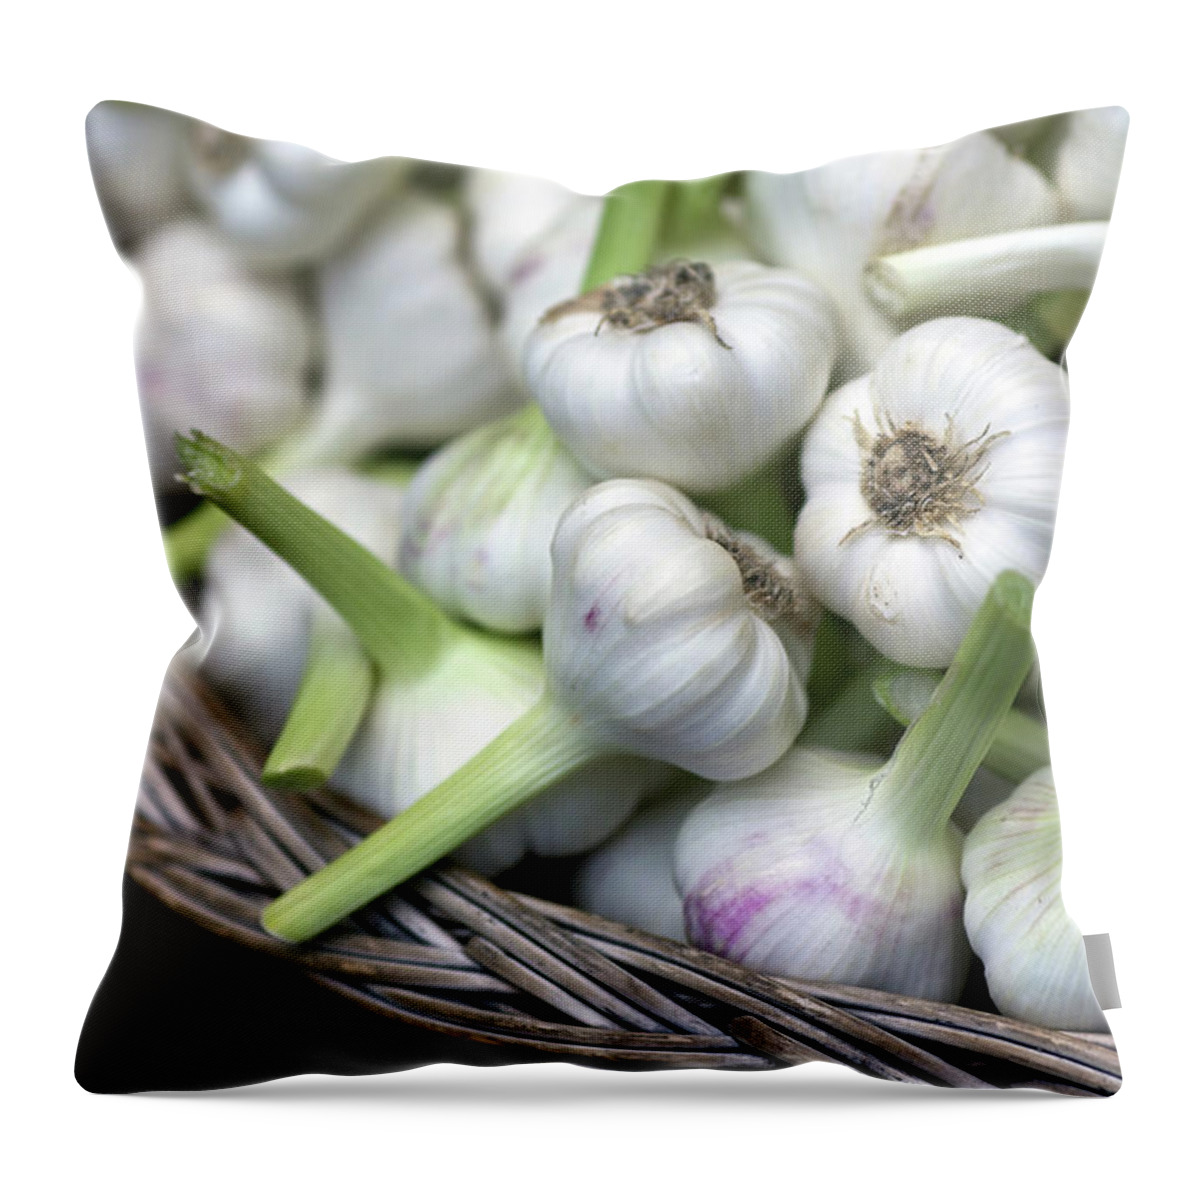 Large Group Of Objects Throw Pillow featuring the photograph Garlic by © Dr. J. Bodamer